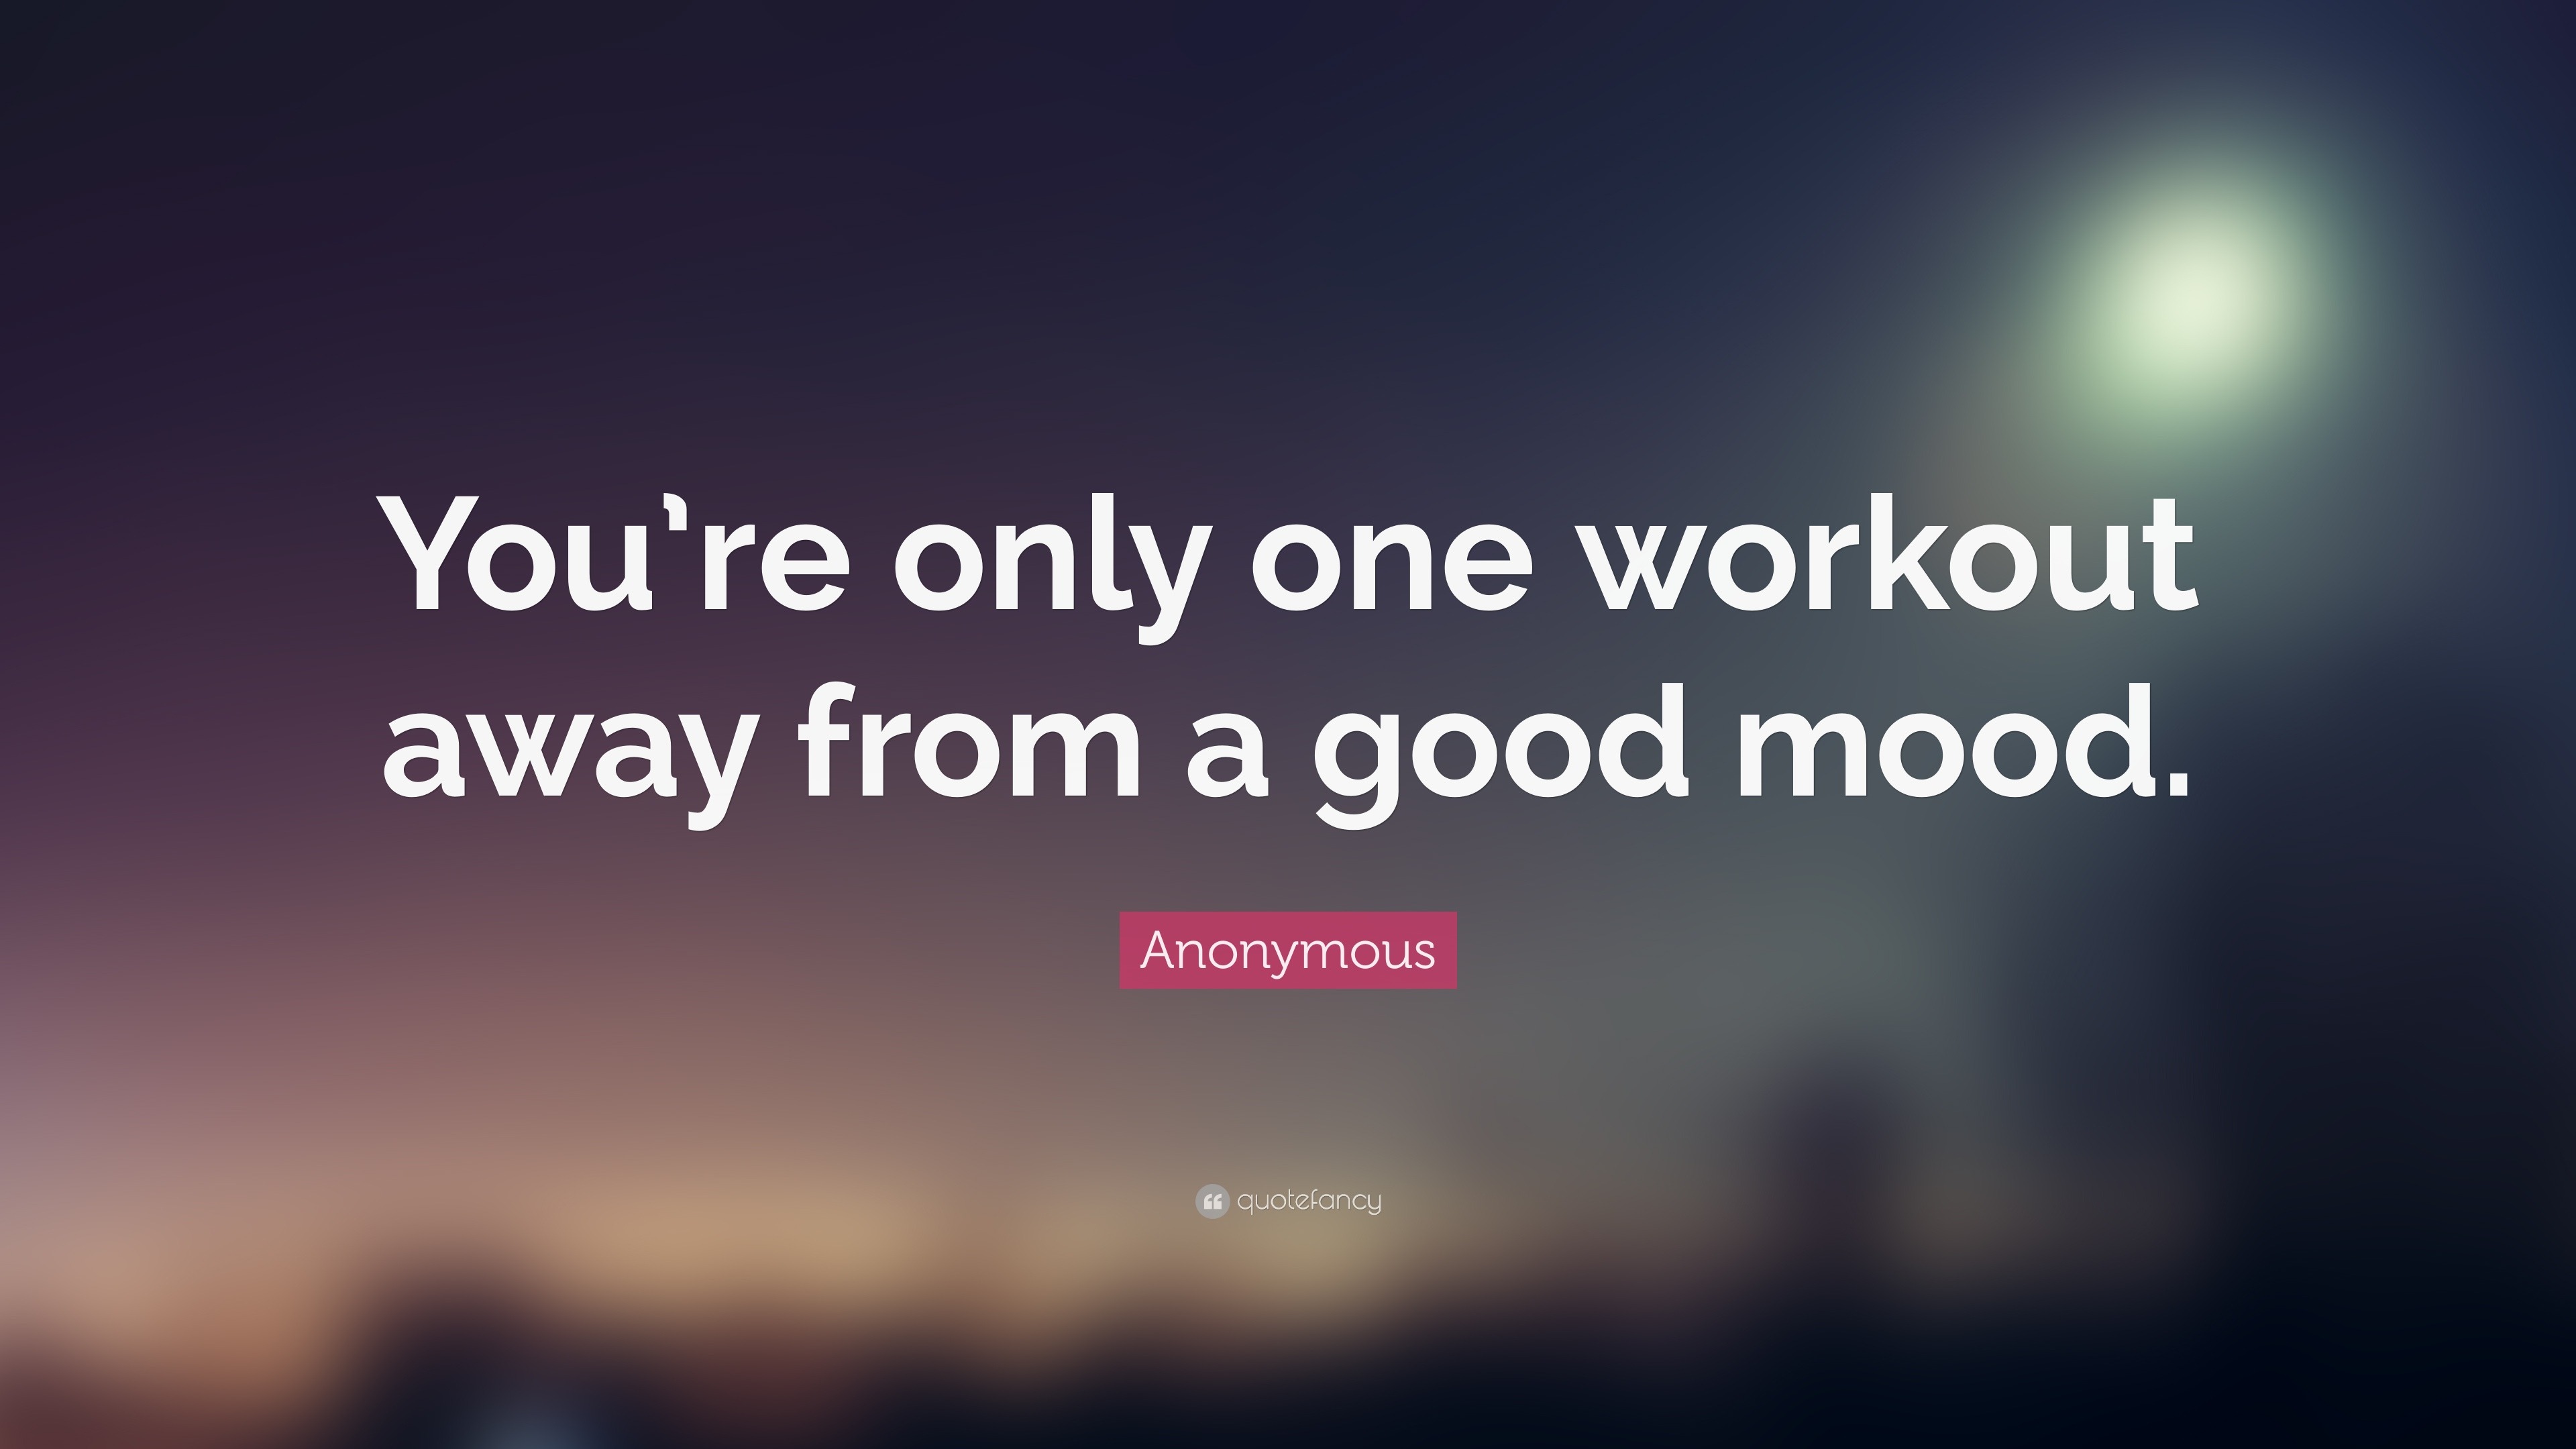 Anonymous Quote: “You’re only one workout away from a good mood.”